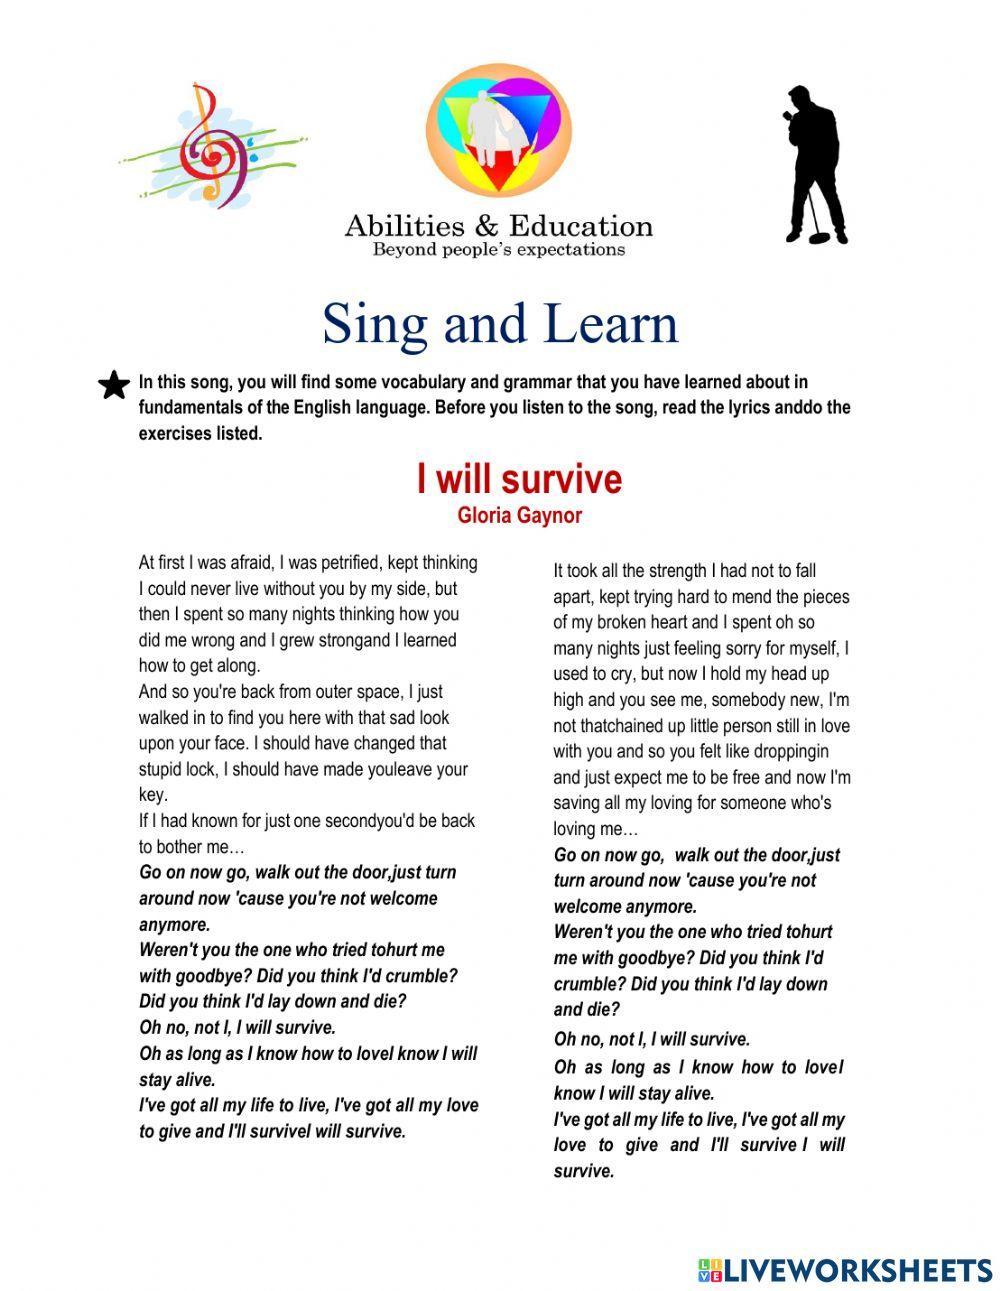 Sing and Learn - I will survive